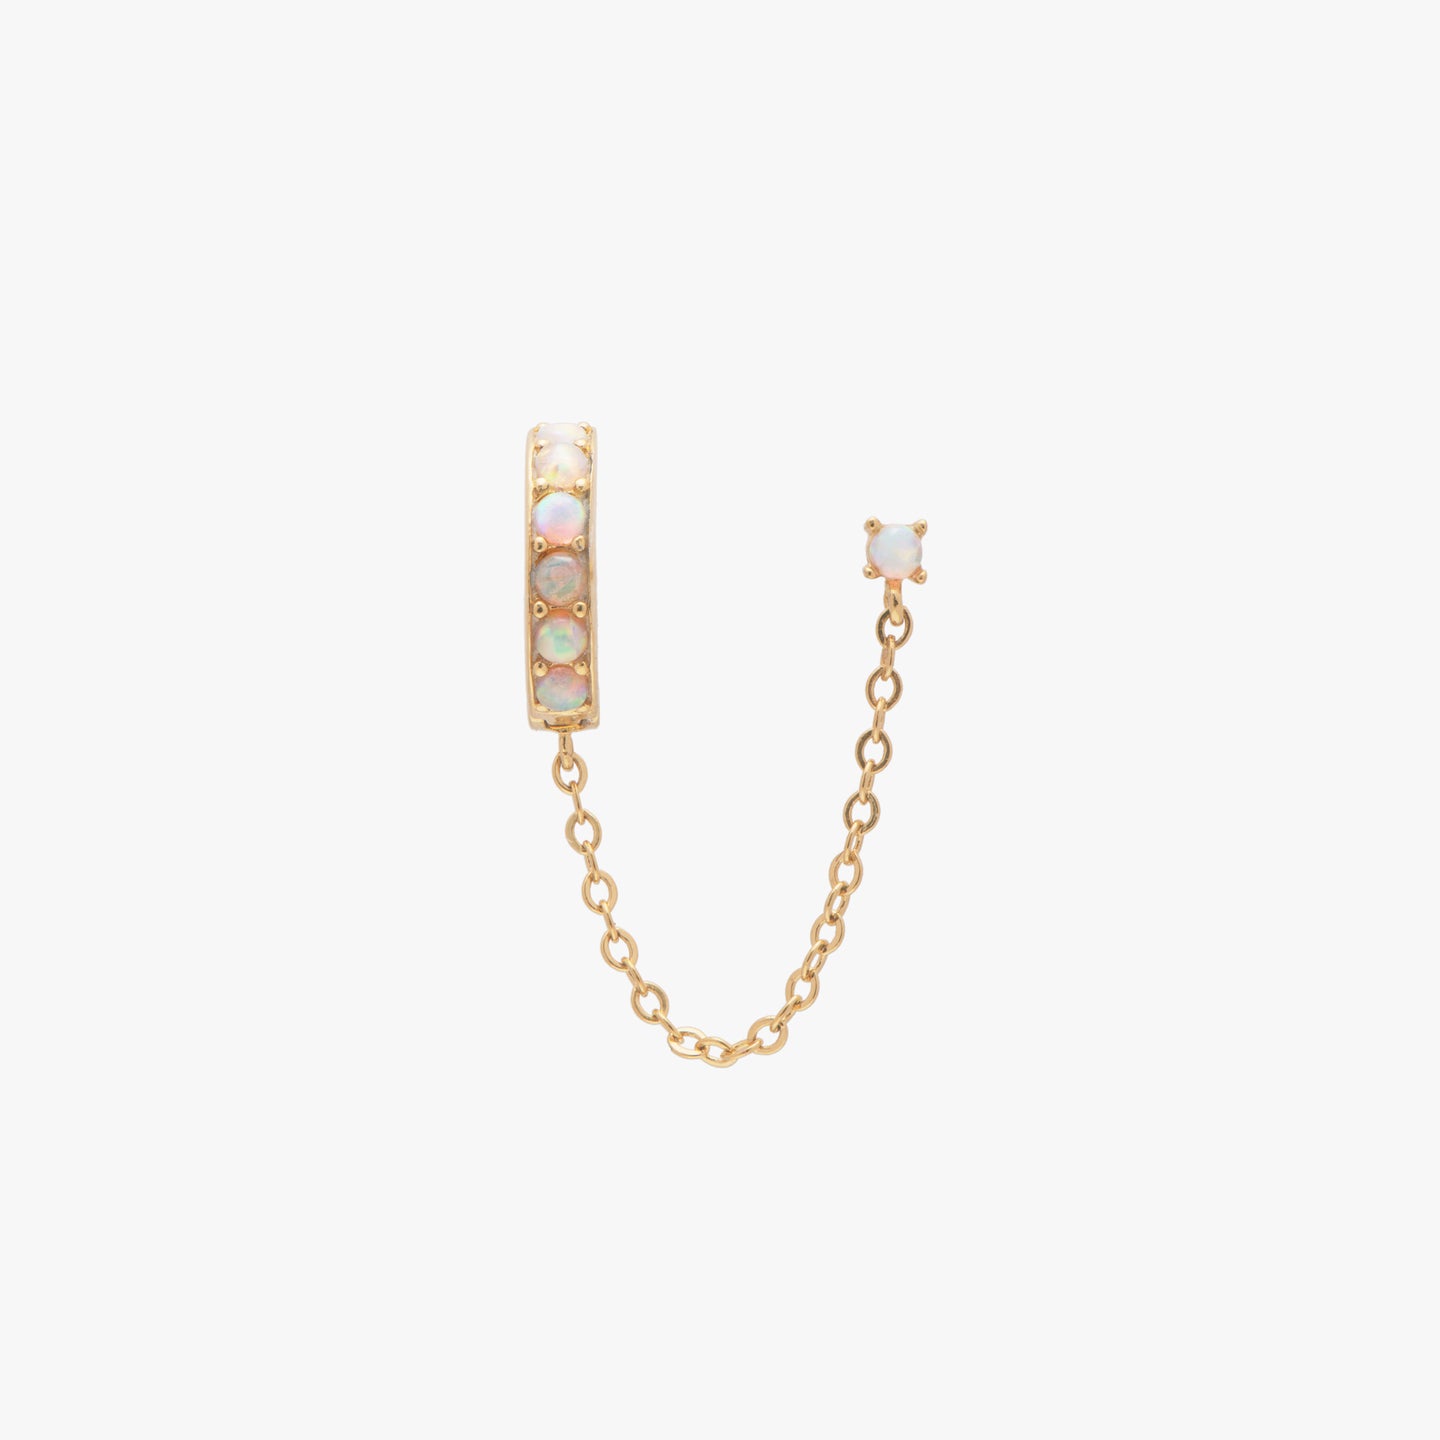 This is a small gold opal lined huggie connected with an opal stud by a chain color:null|gold/opal